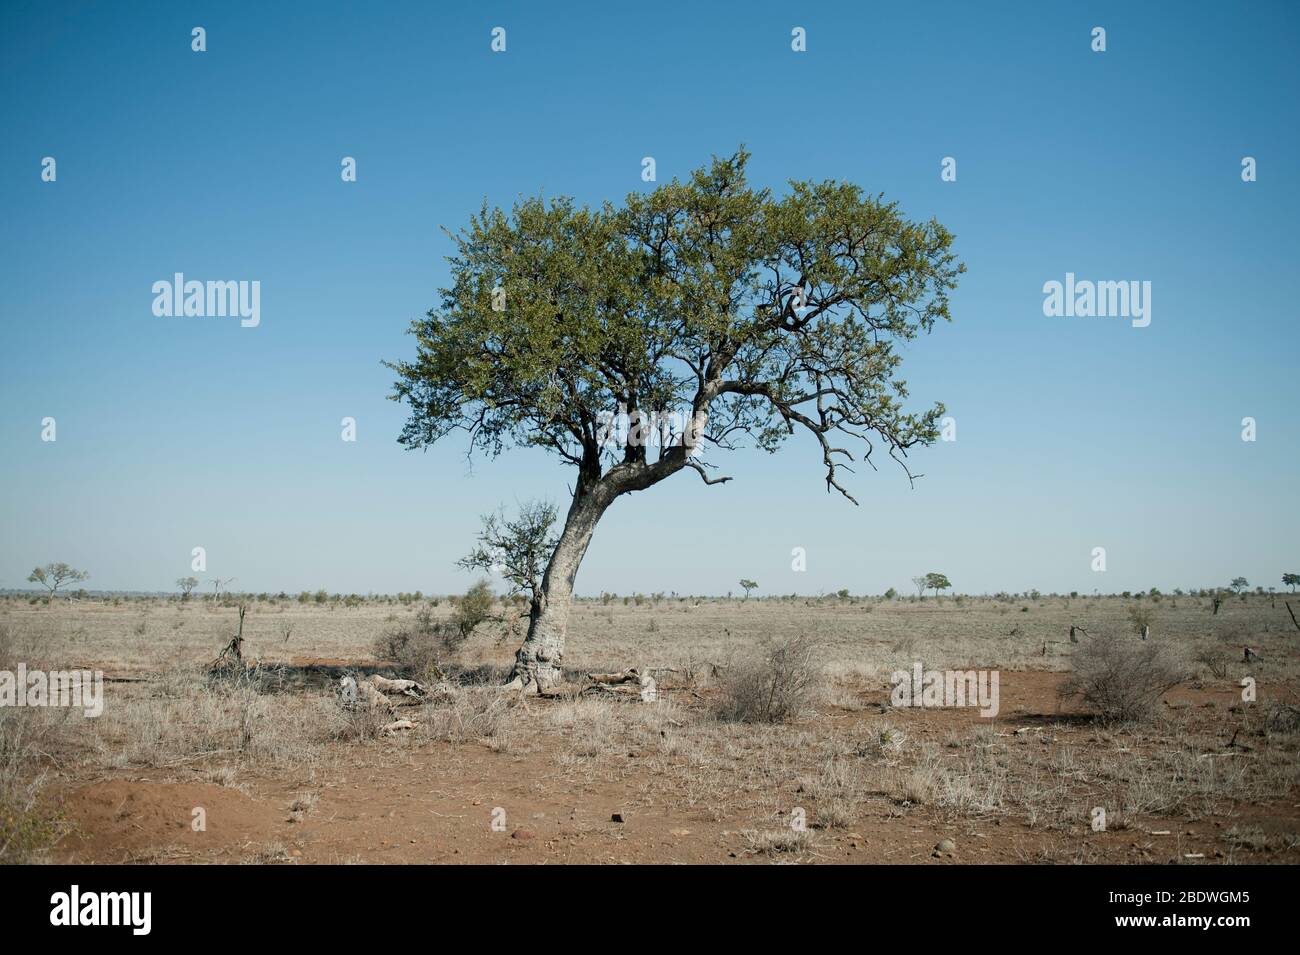 Tree, Kruger National Park, Mpumalanga province, South Africa, Africa Stock Photo